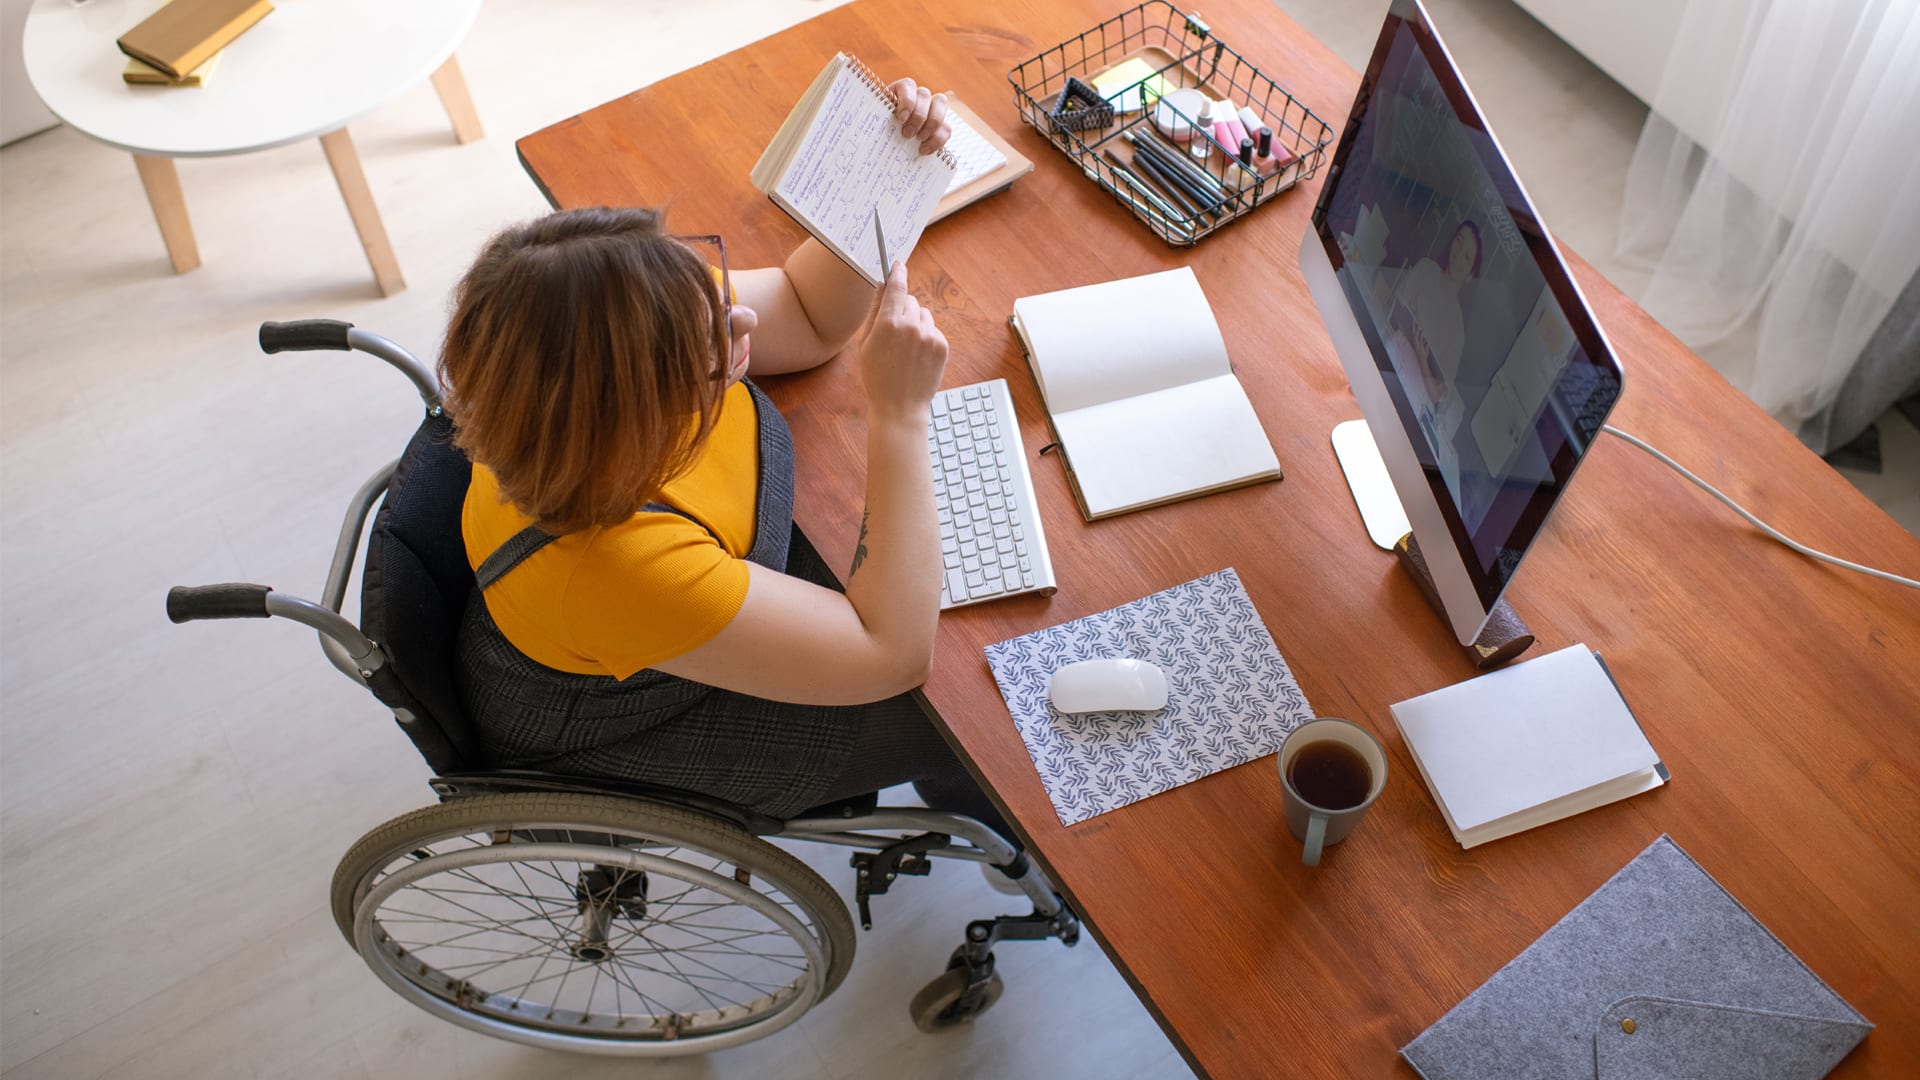 2020 Might Have a Silver Lining for Employees with Disabilities